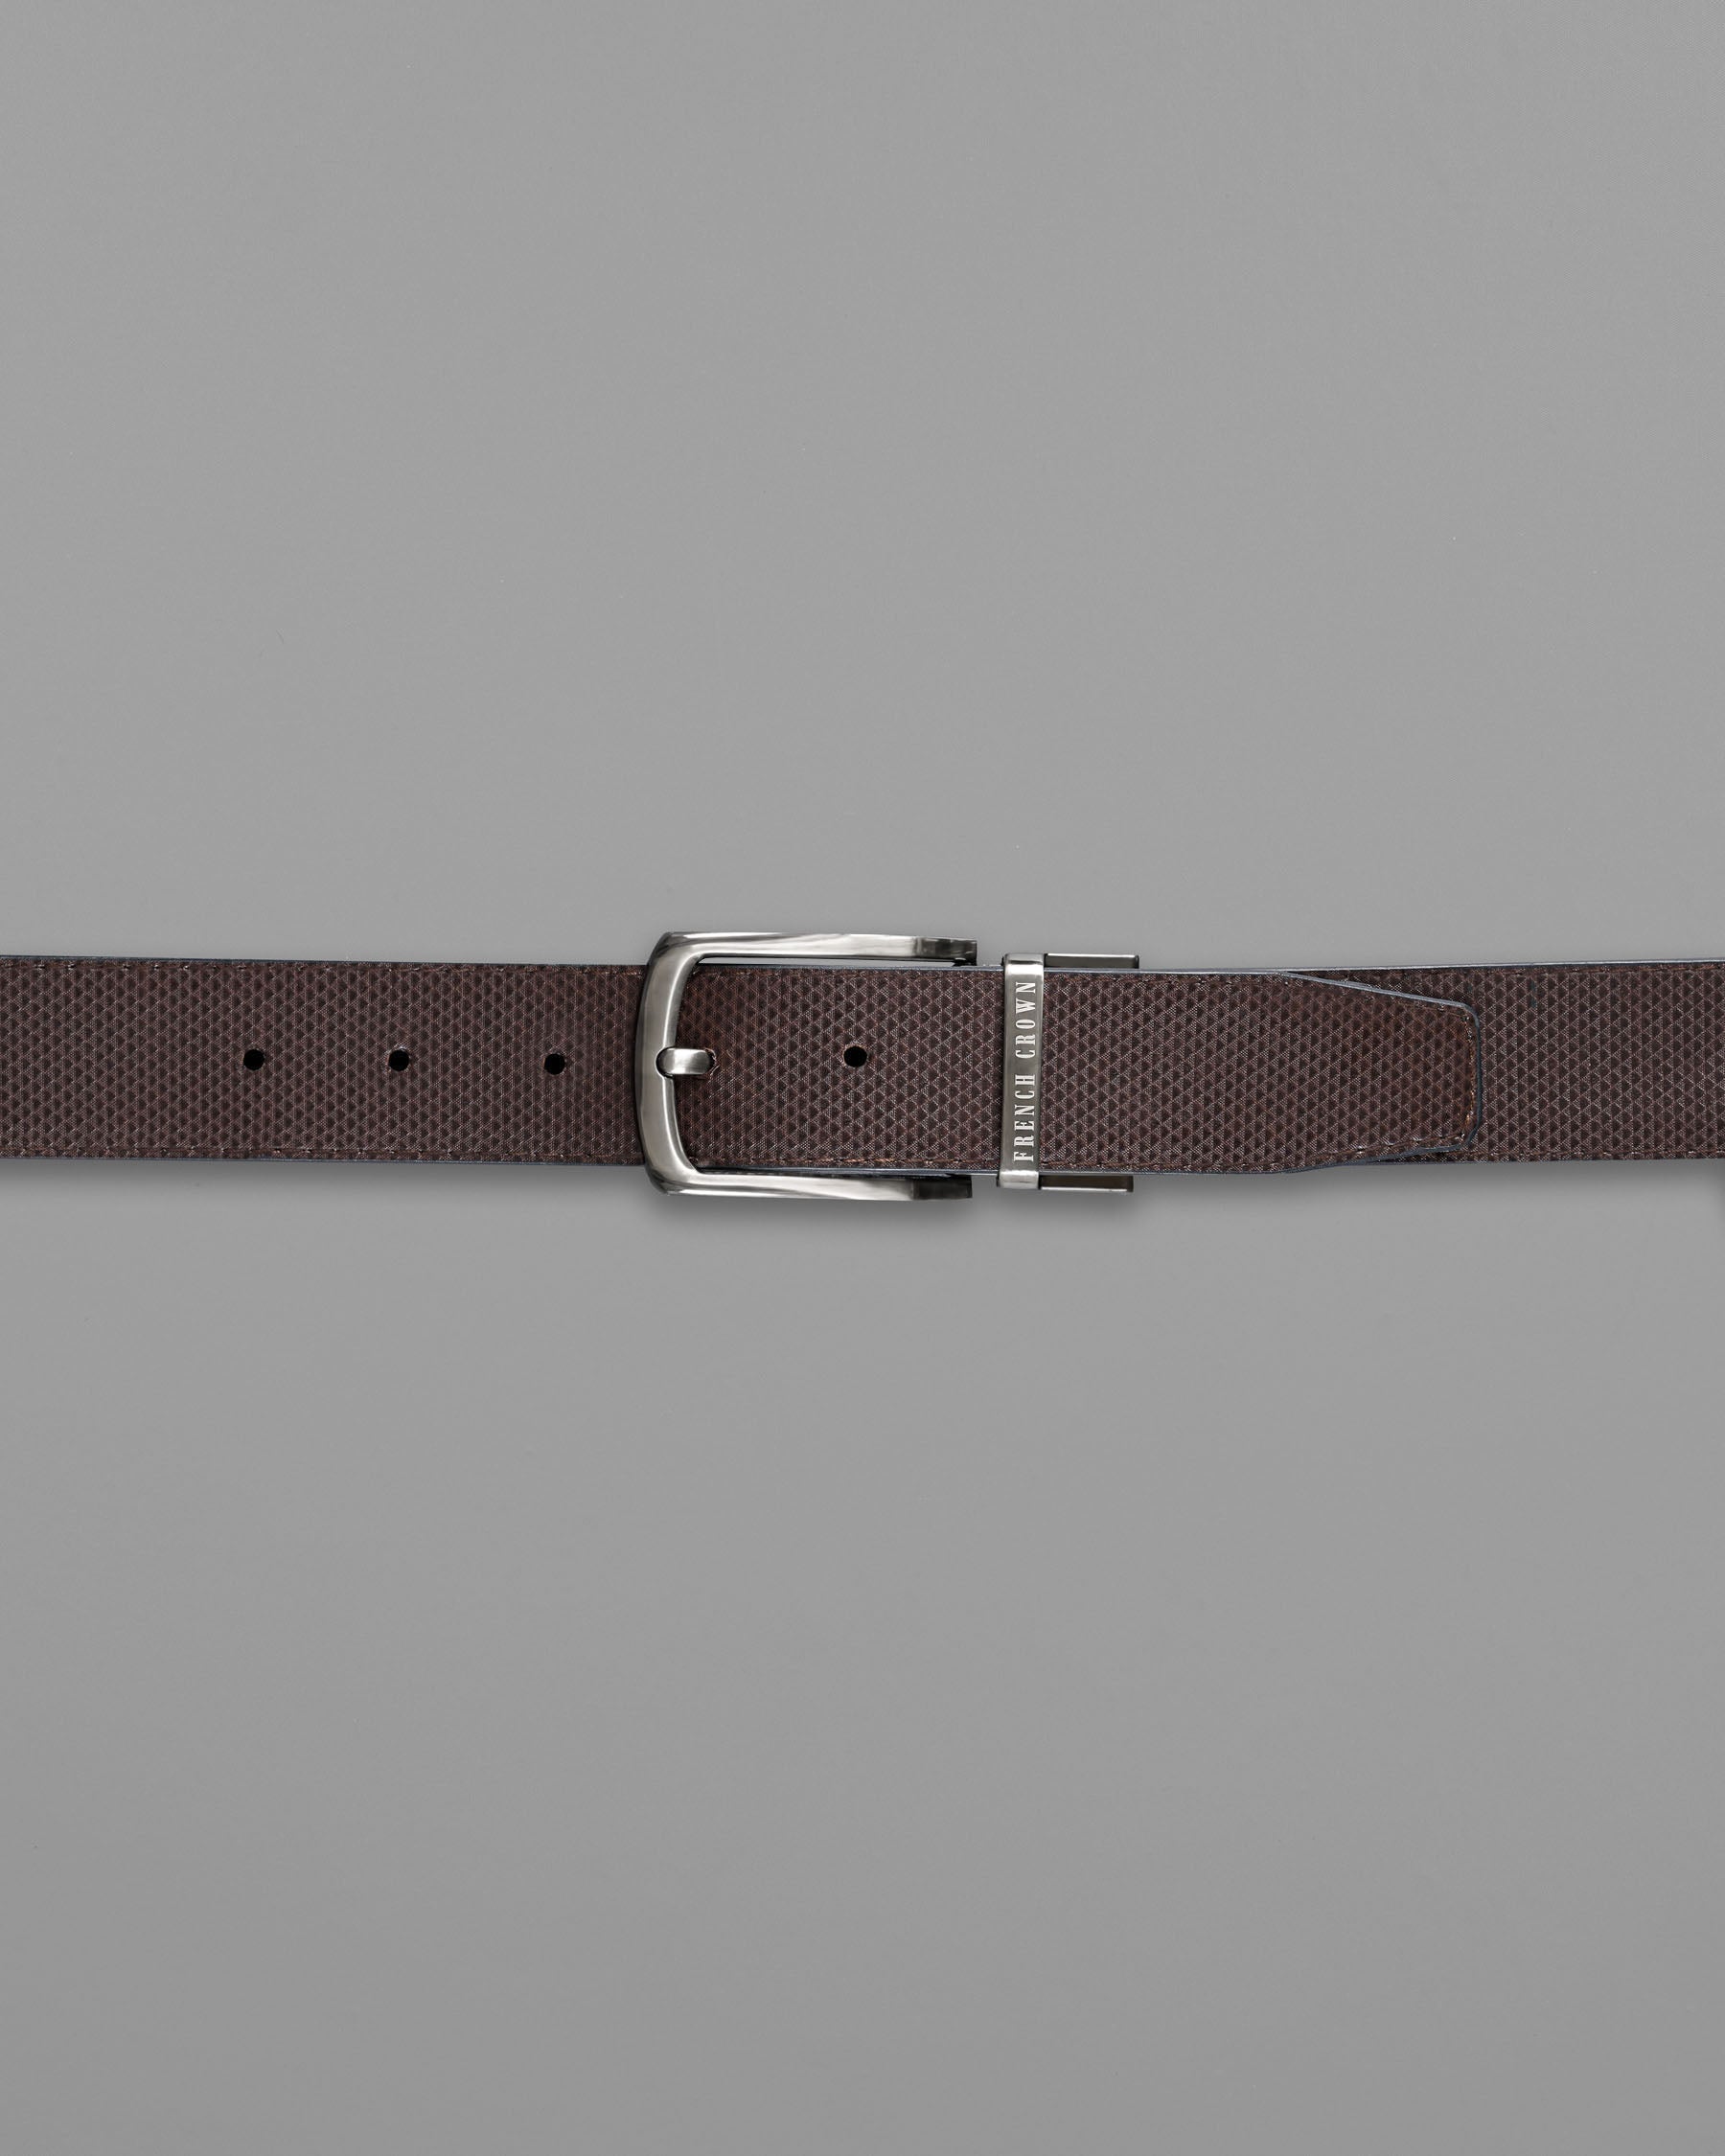 Silver Metallic Shiny Buckle with Jade Black and Brown Leather Free Handcrafted Reversible Belt BT075-28, BT075-30, BT075-32, BT075-34, BT075-36, BT075-38